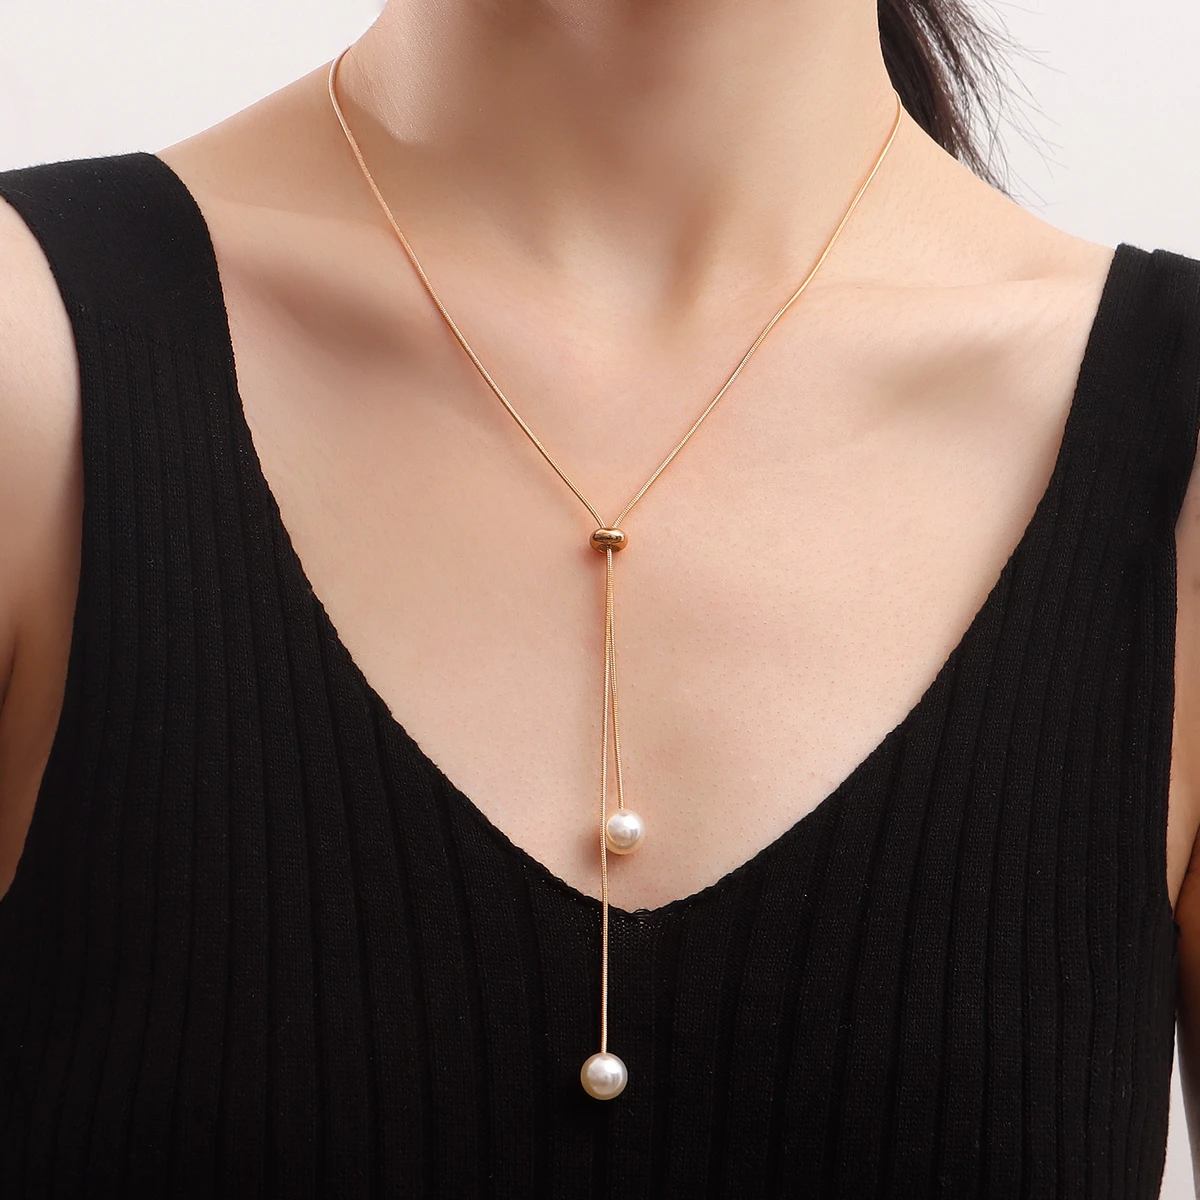 New Stylish Short Necklaces For Woman